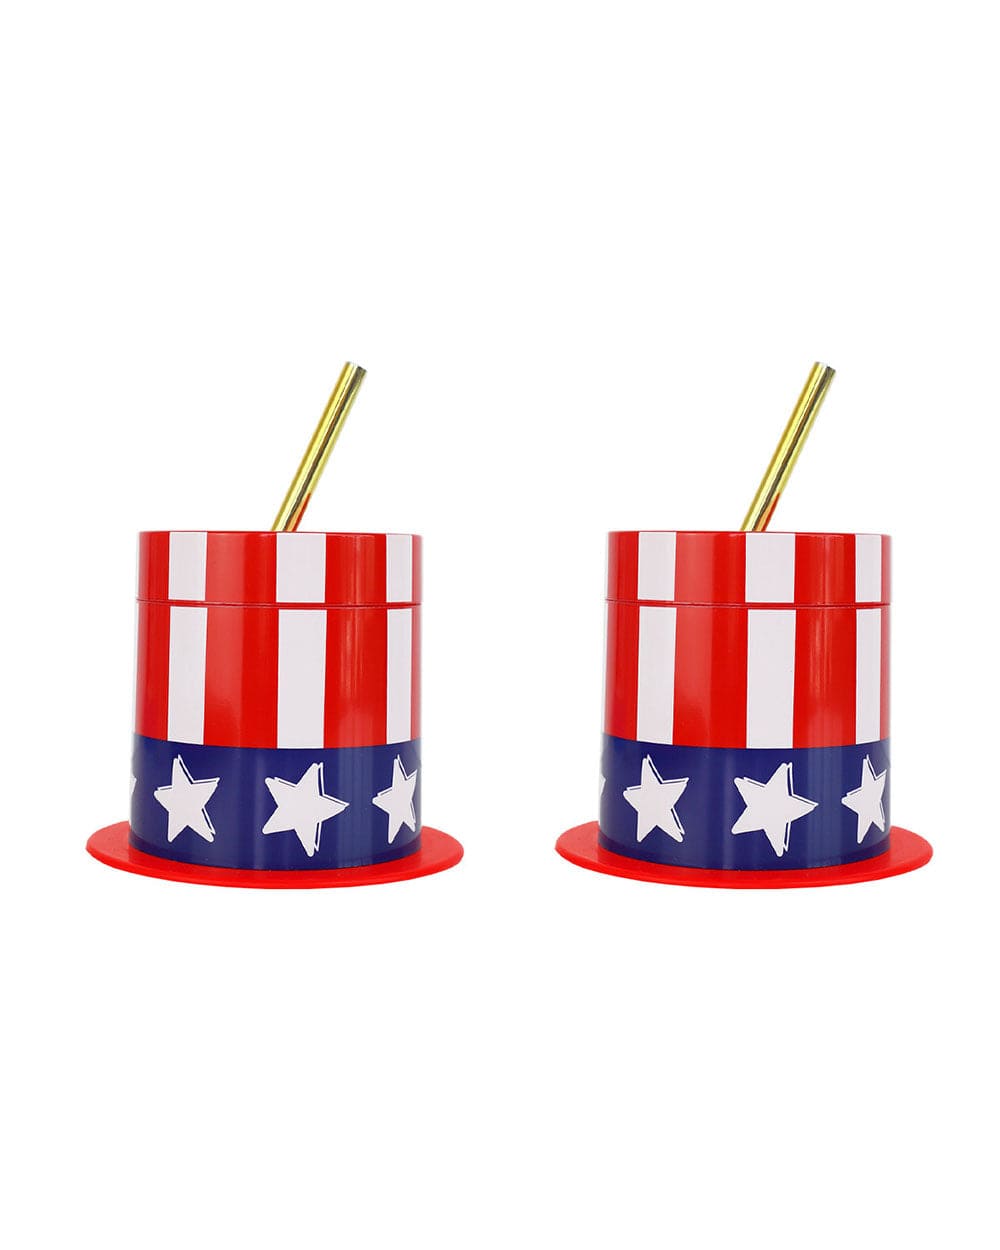 Hats Off to The USA Sipper Set with Straws (Set of 2)